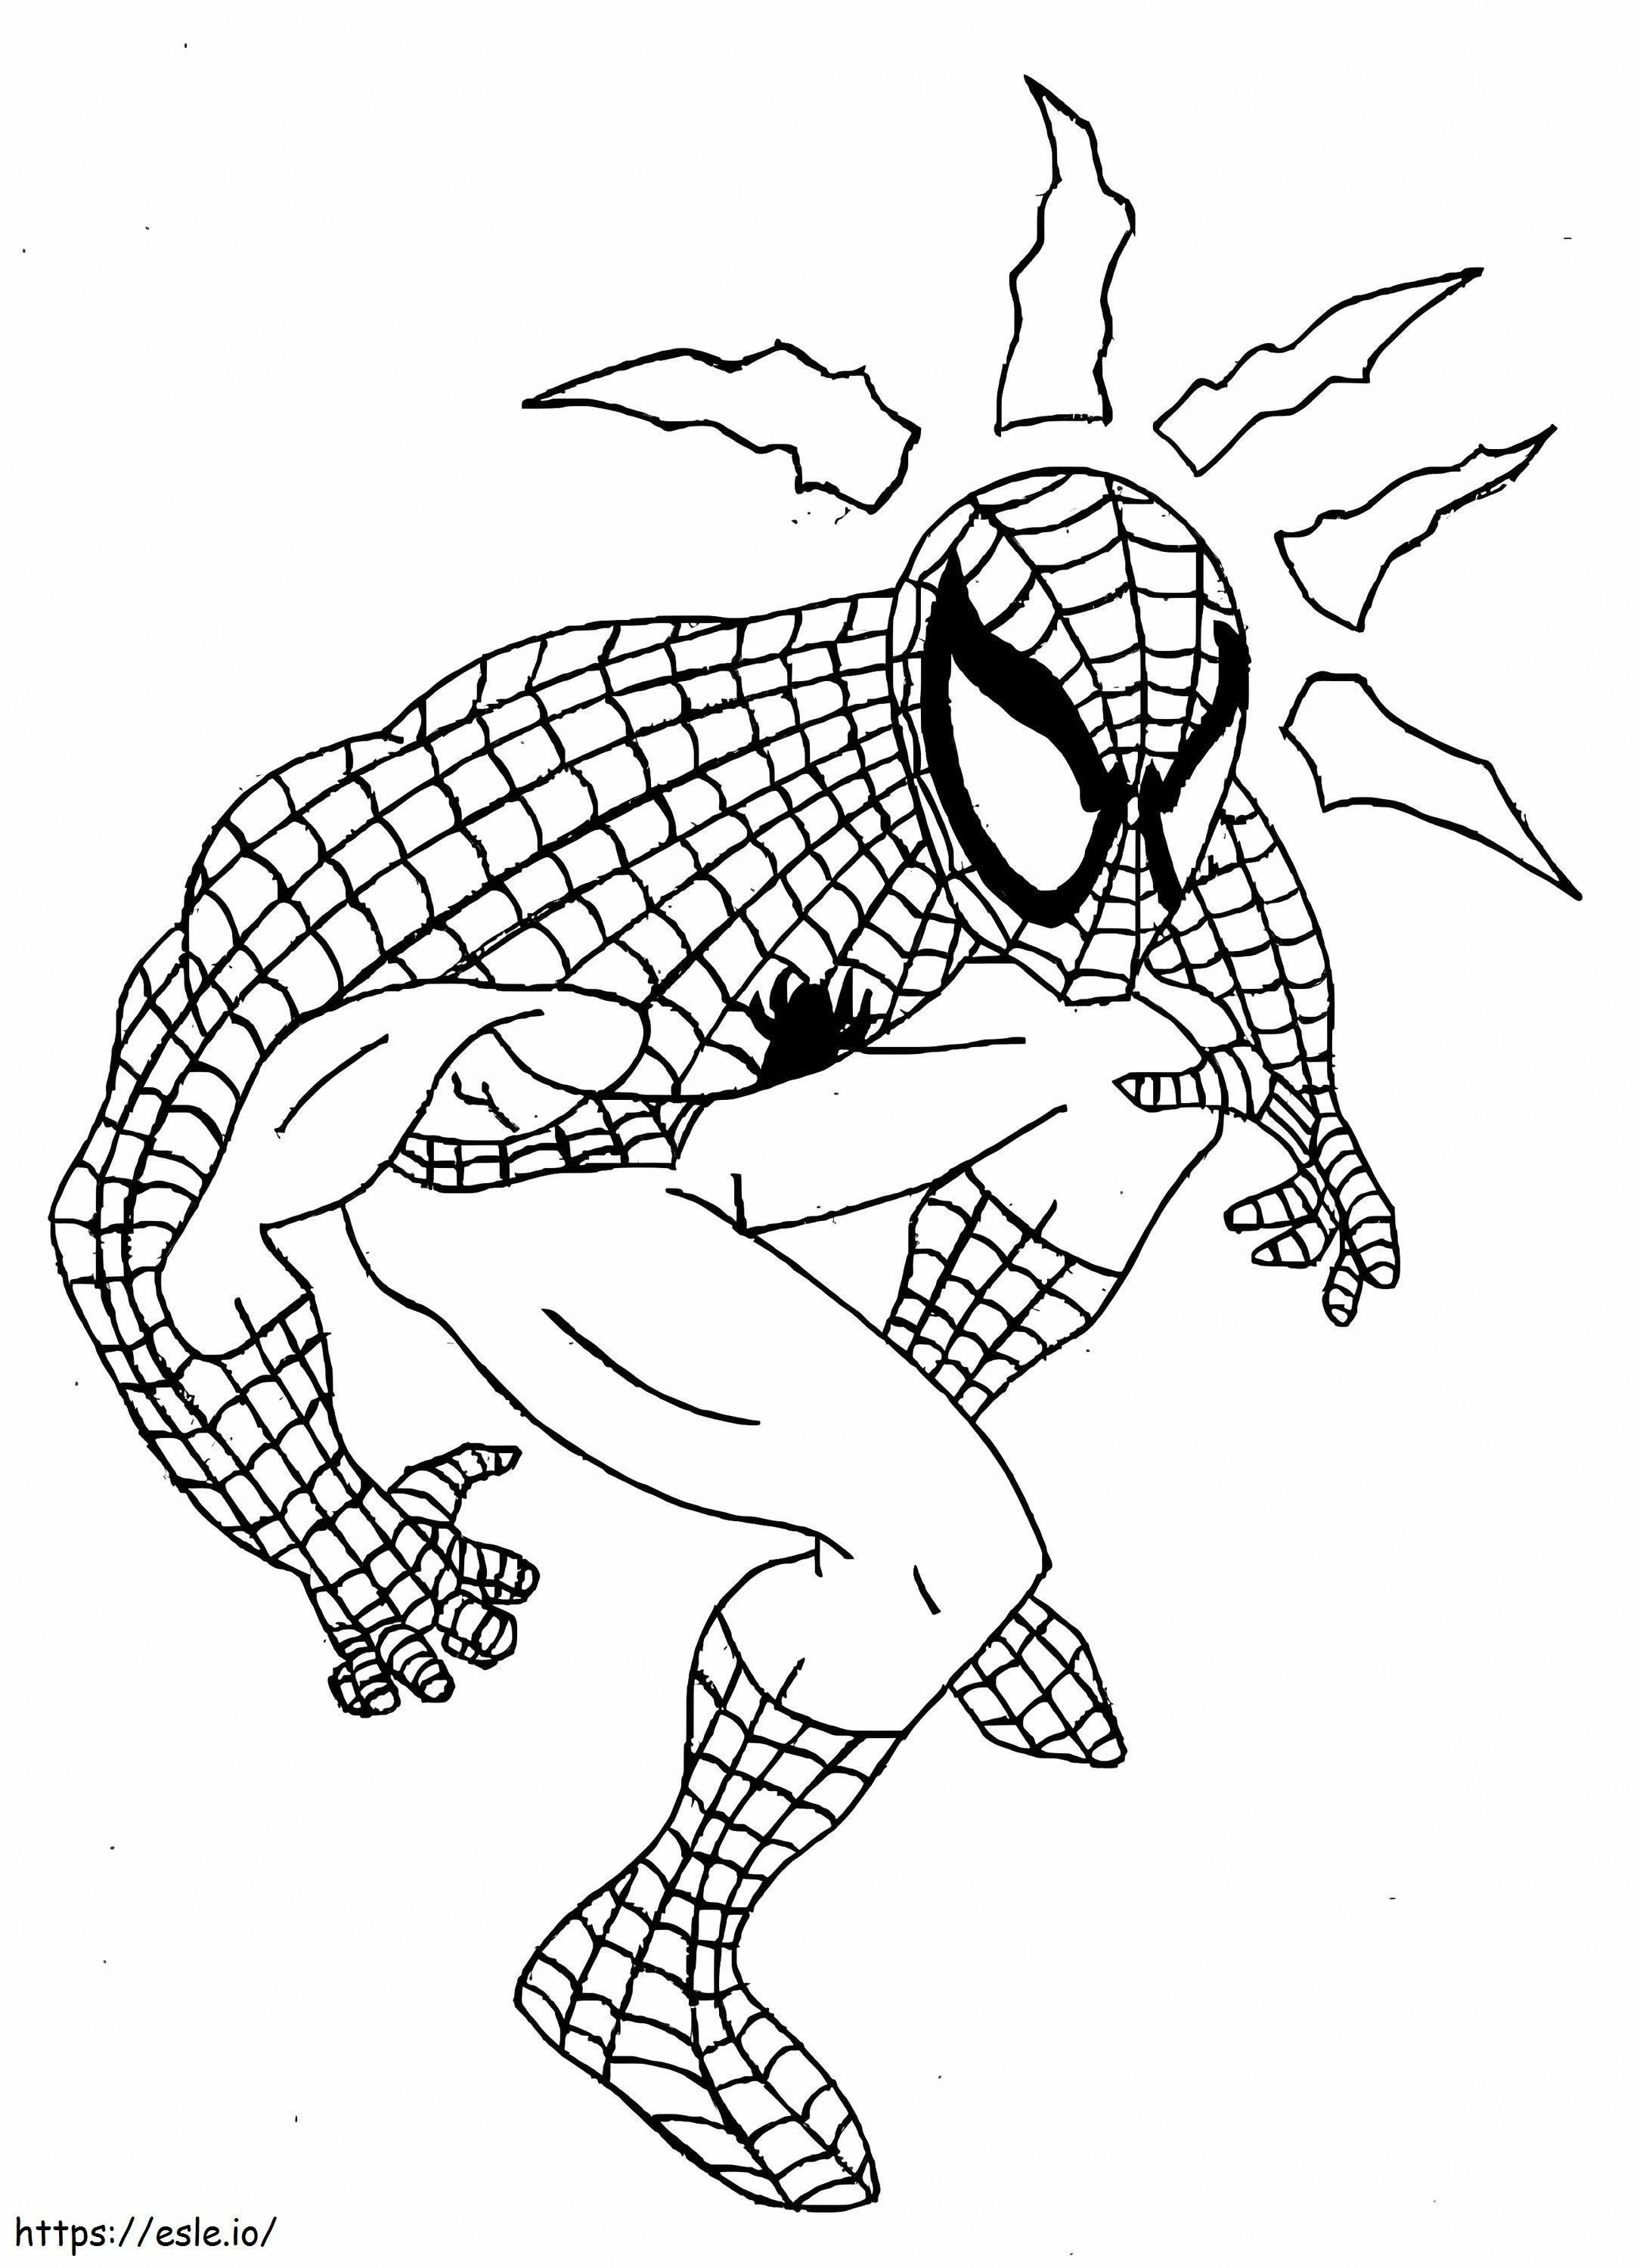 Spider Man 2 coloring page